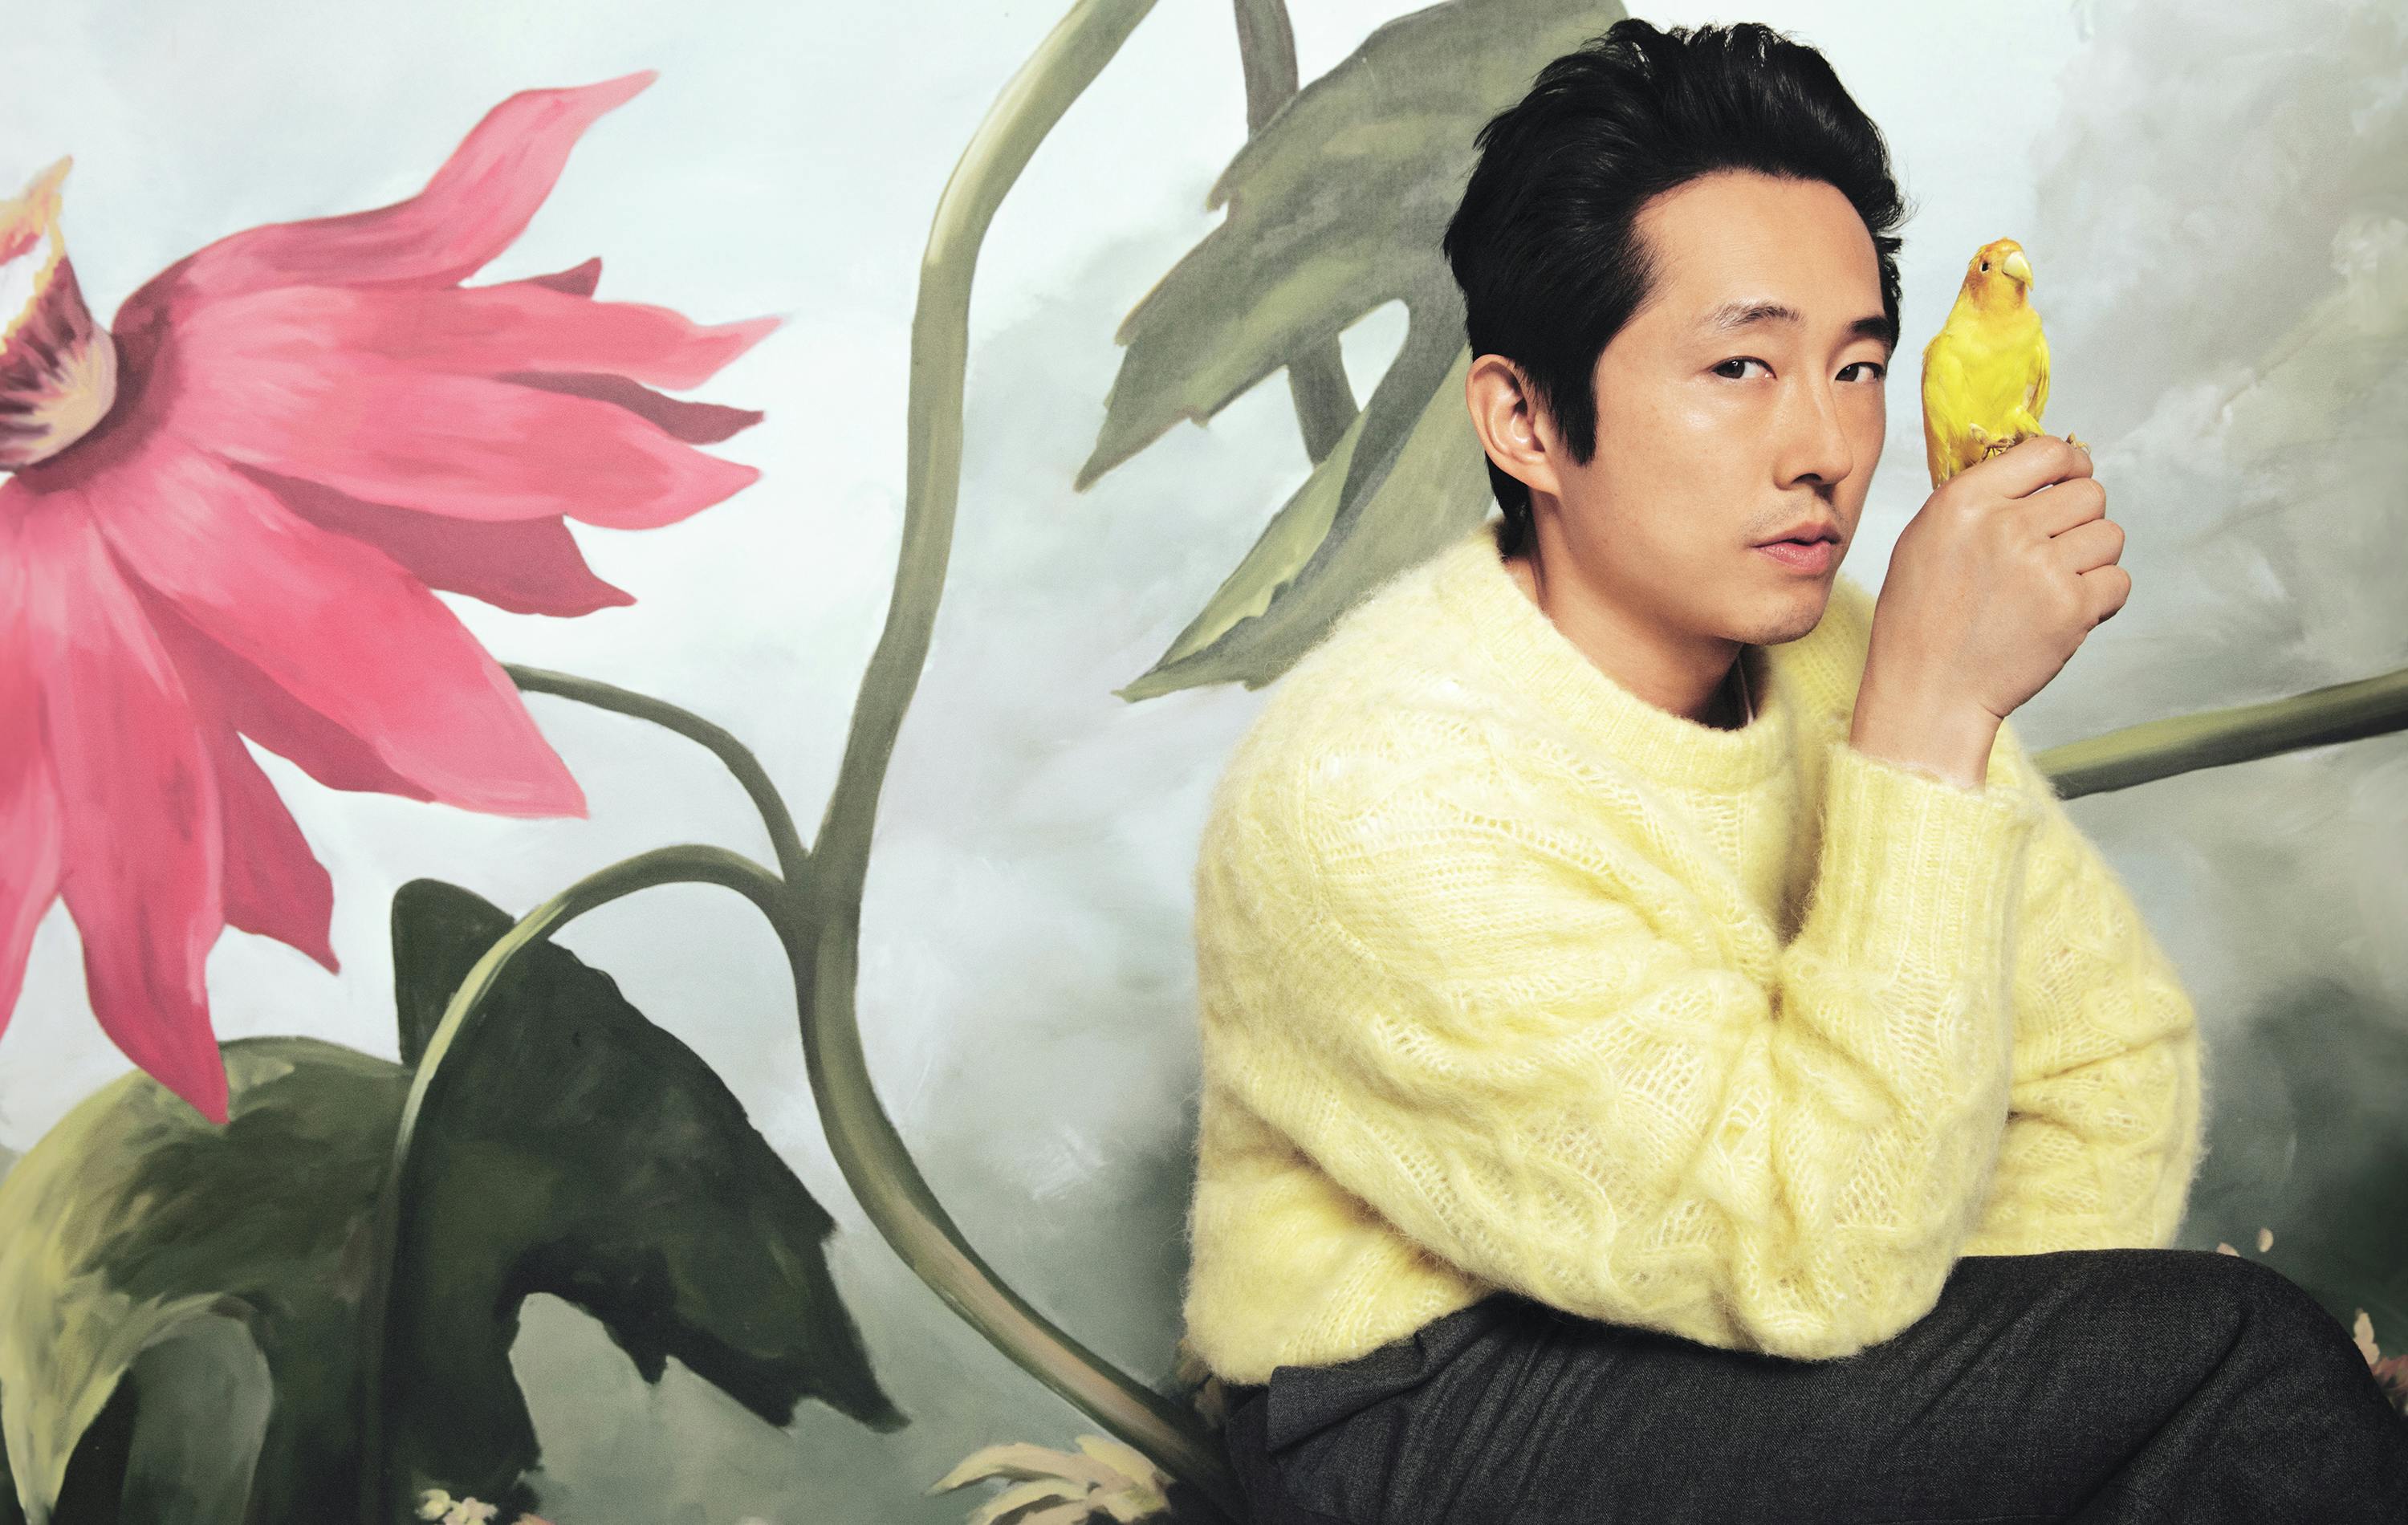 Steven Yeun wears a yellow sweater and black pants. A little yellow bird is perched on his hand. Behind him are some painted flowers on the wall. 